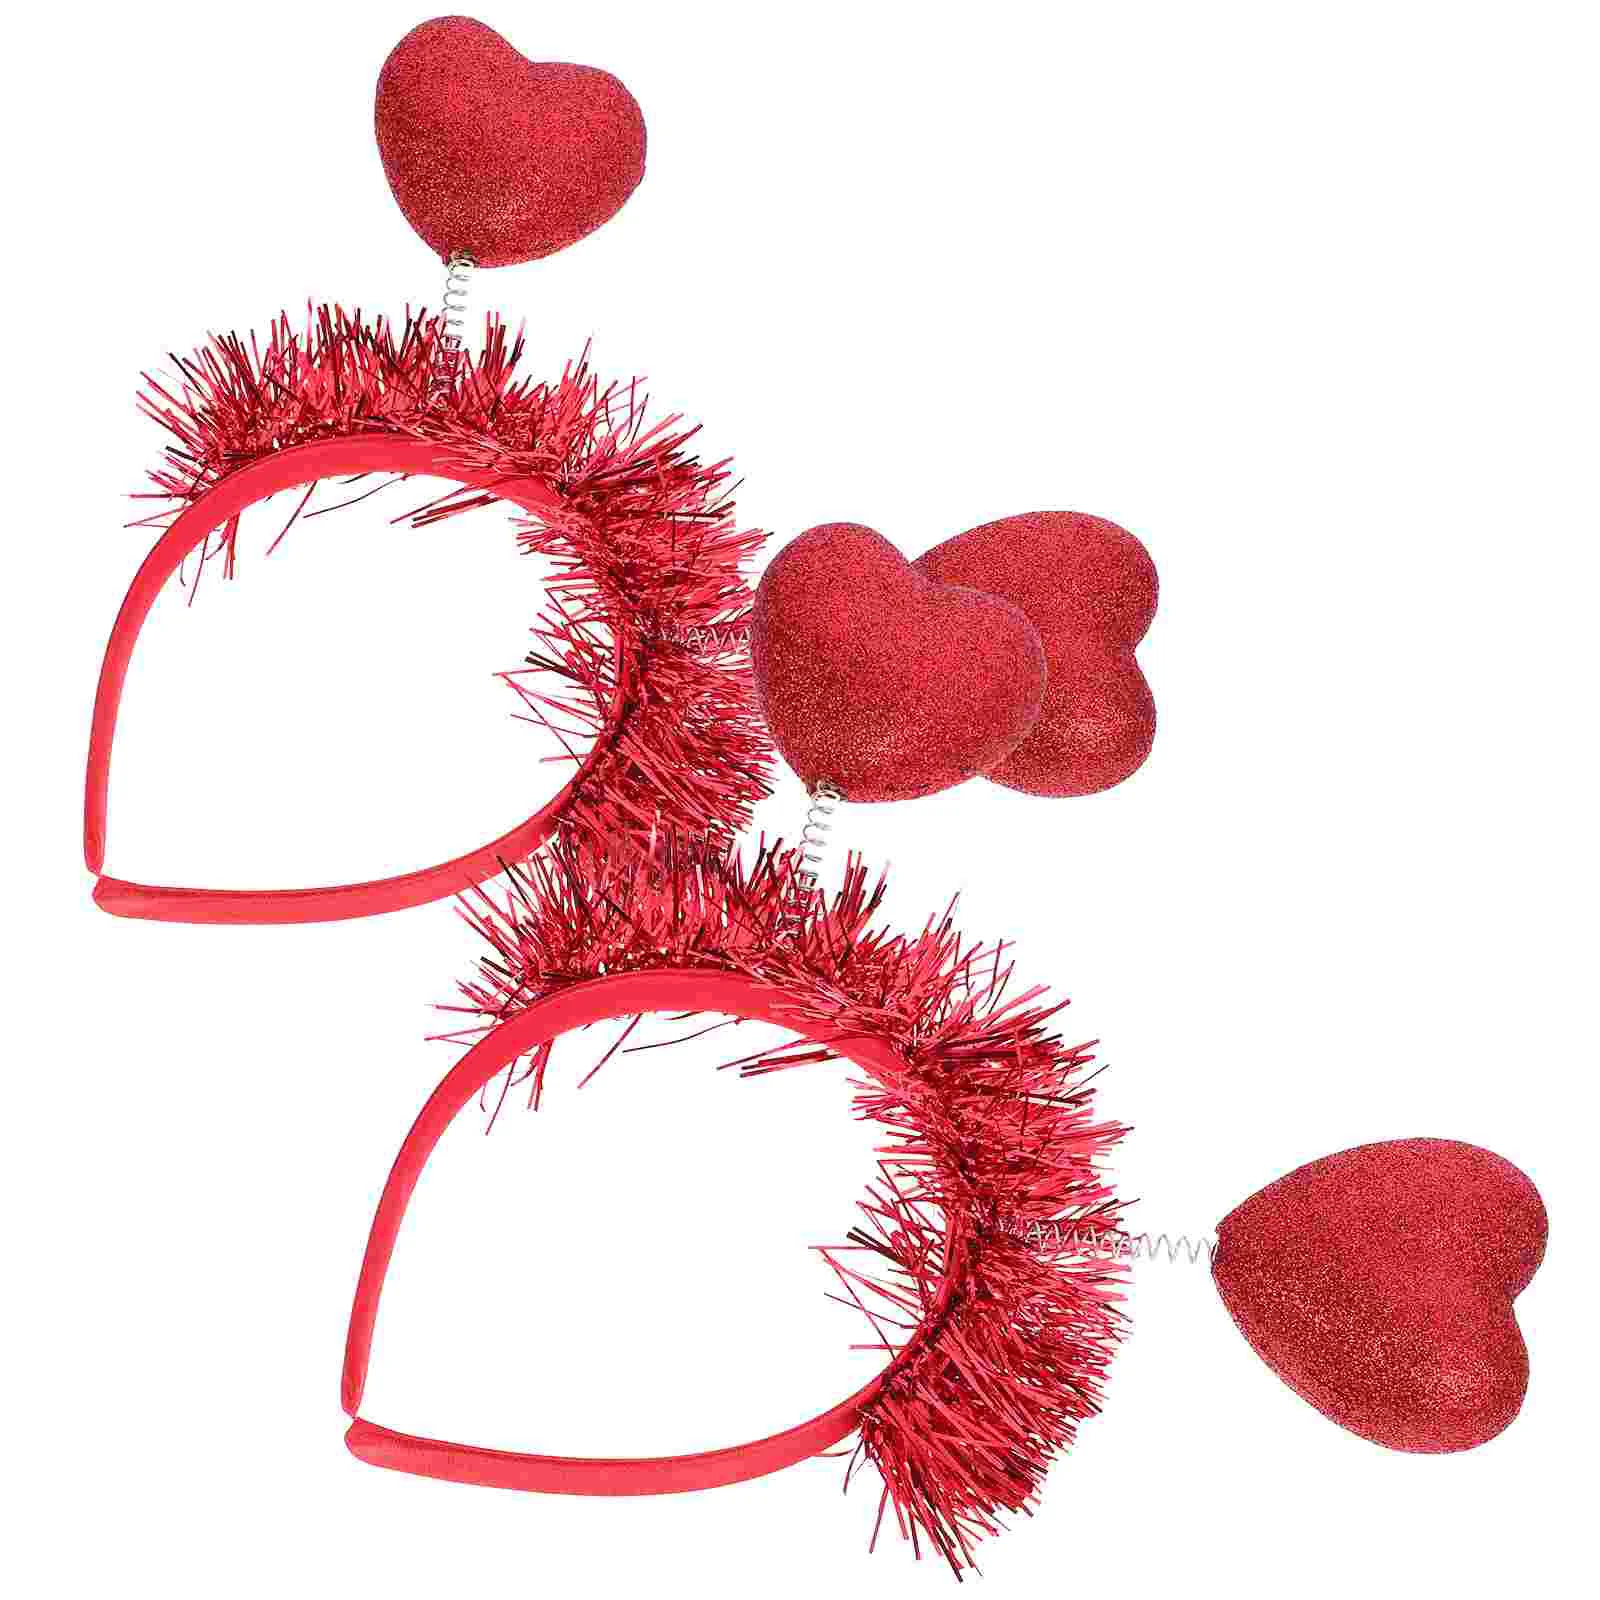 2 Pcs Love Headband Props Valentines Day Party Hairband Wedding Decorations Photography Headpiece Heart-shaped newborn baby photography props boys one piece outfit decorations backdrop basket sailing theme set studio shooting photo props